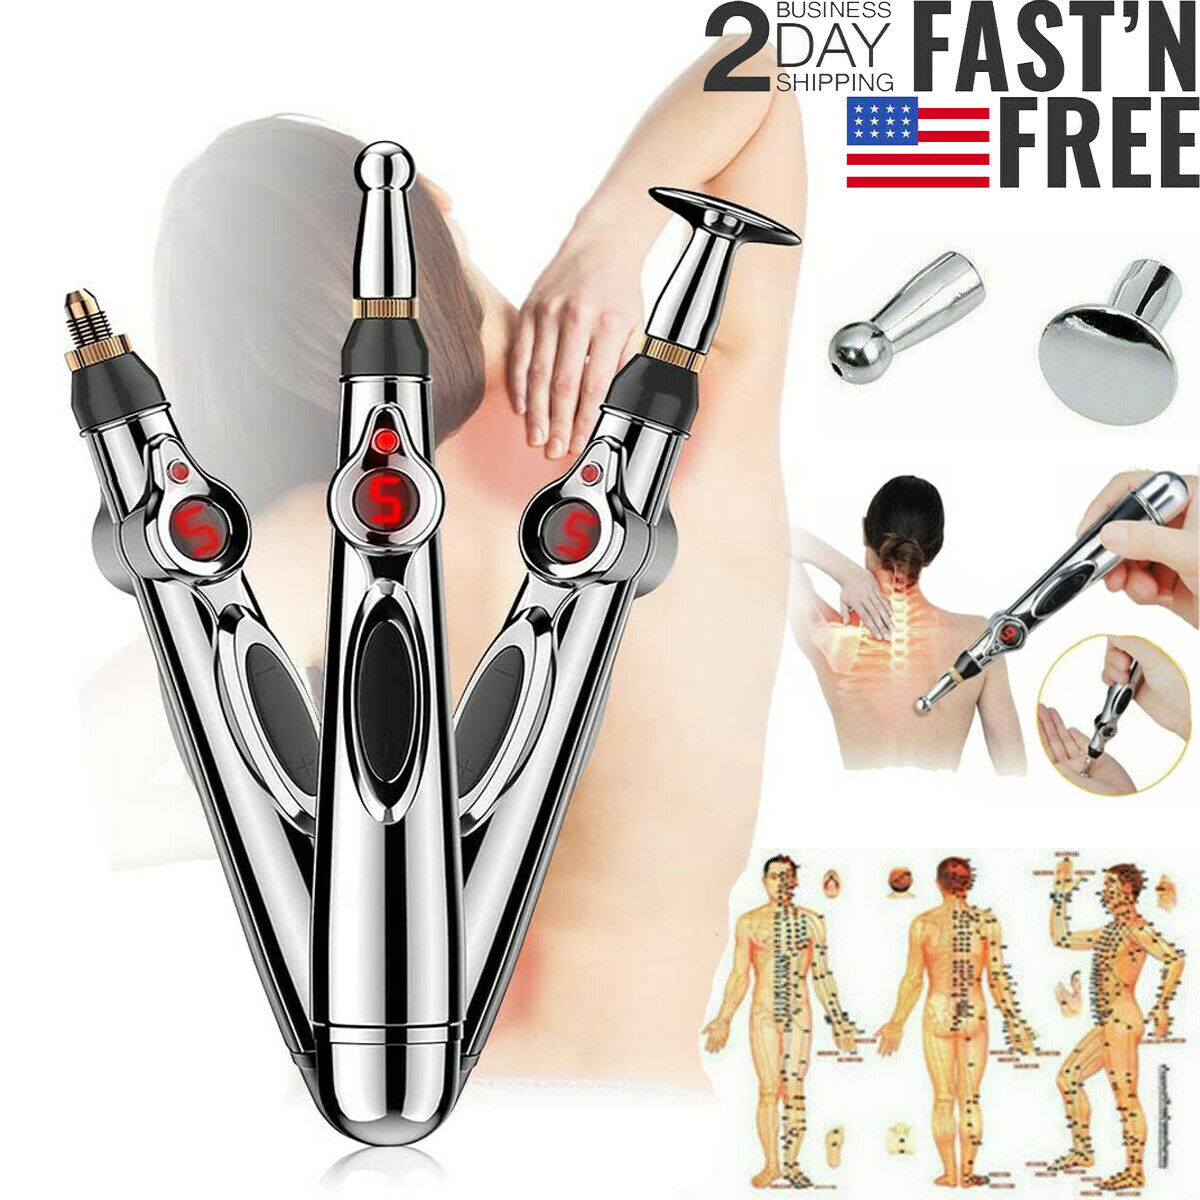 Therapy Electronic Acupuncture Pen Meridian Energy Heal Massage Pain Relief